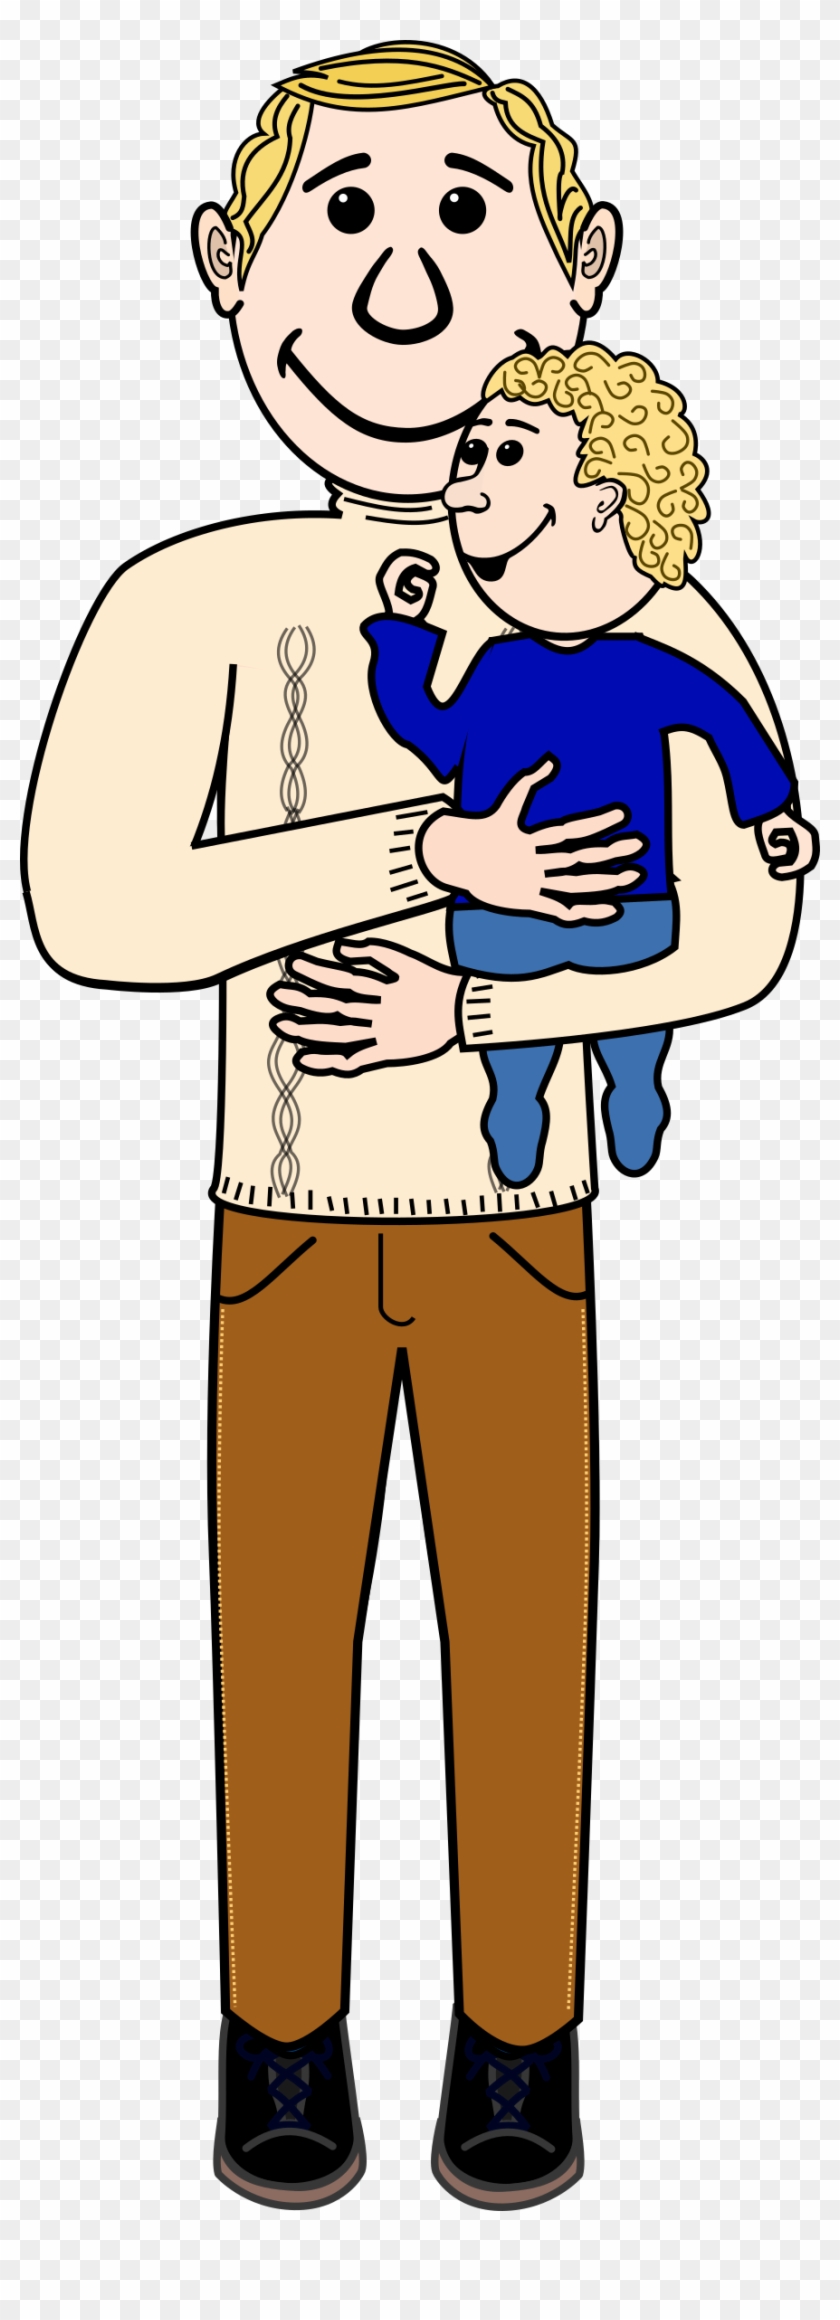 Father And Child Png Image - Father Png #969140